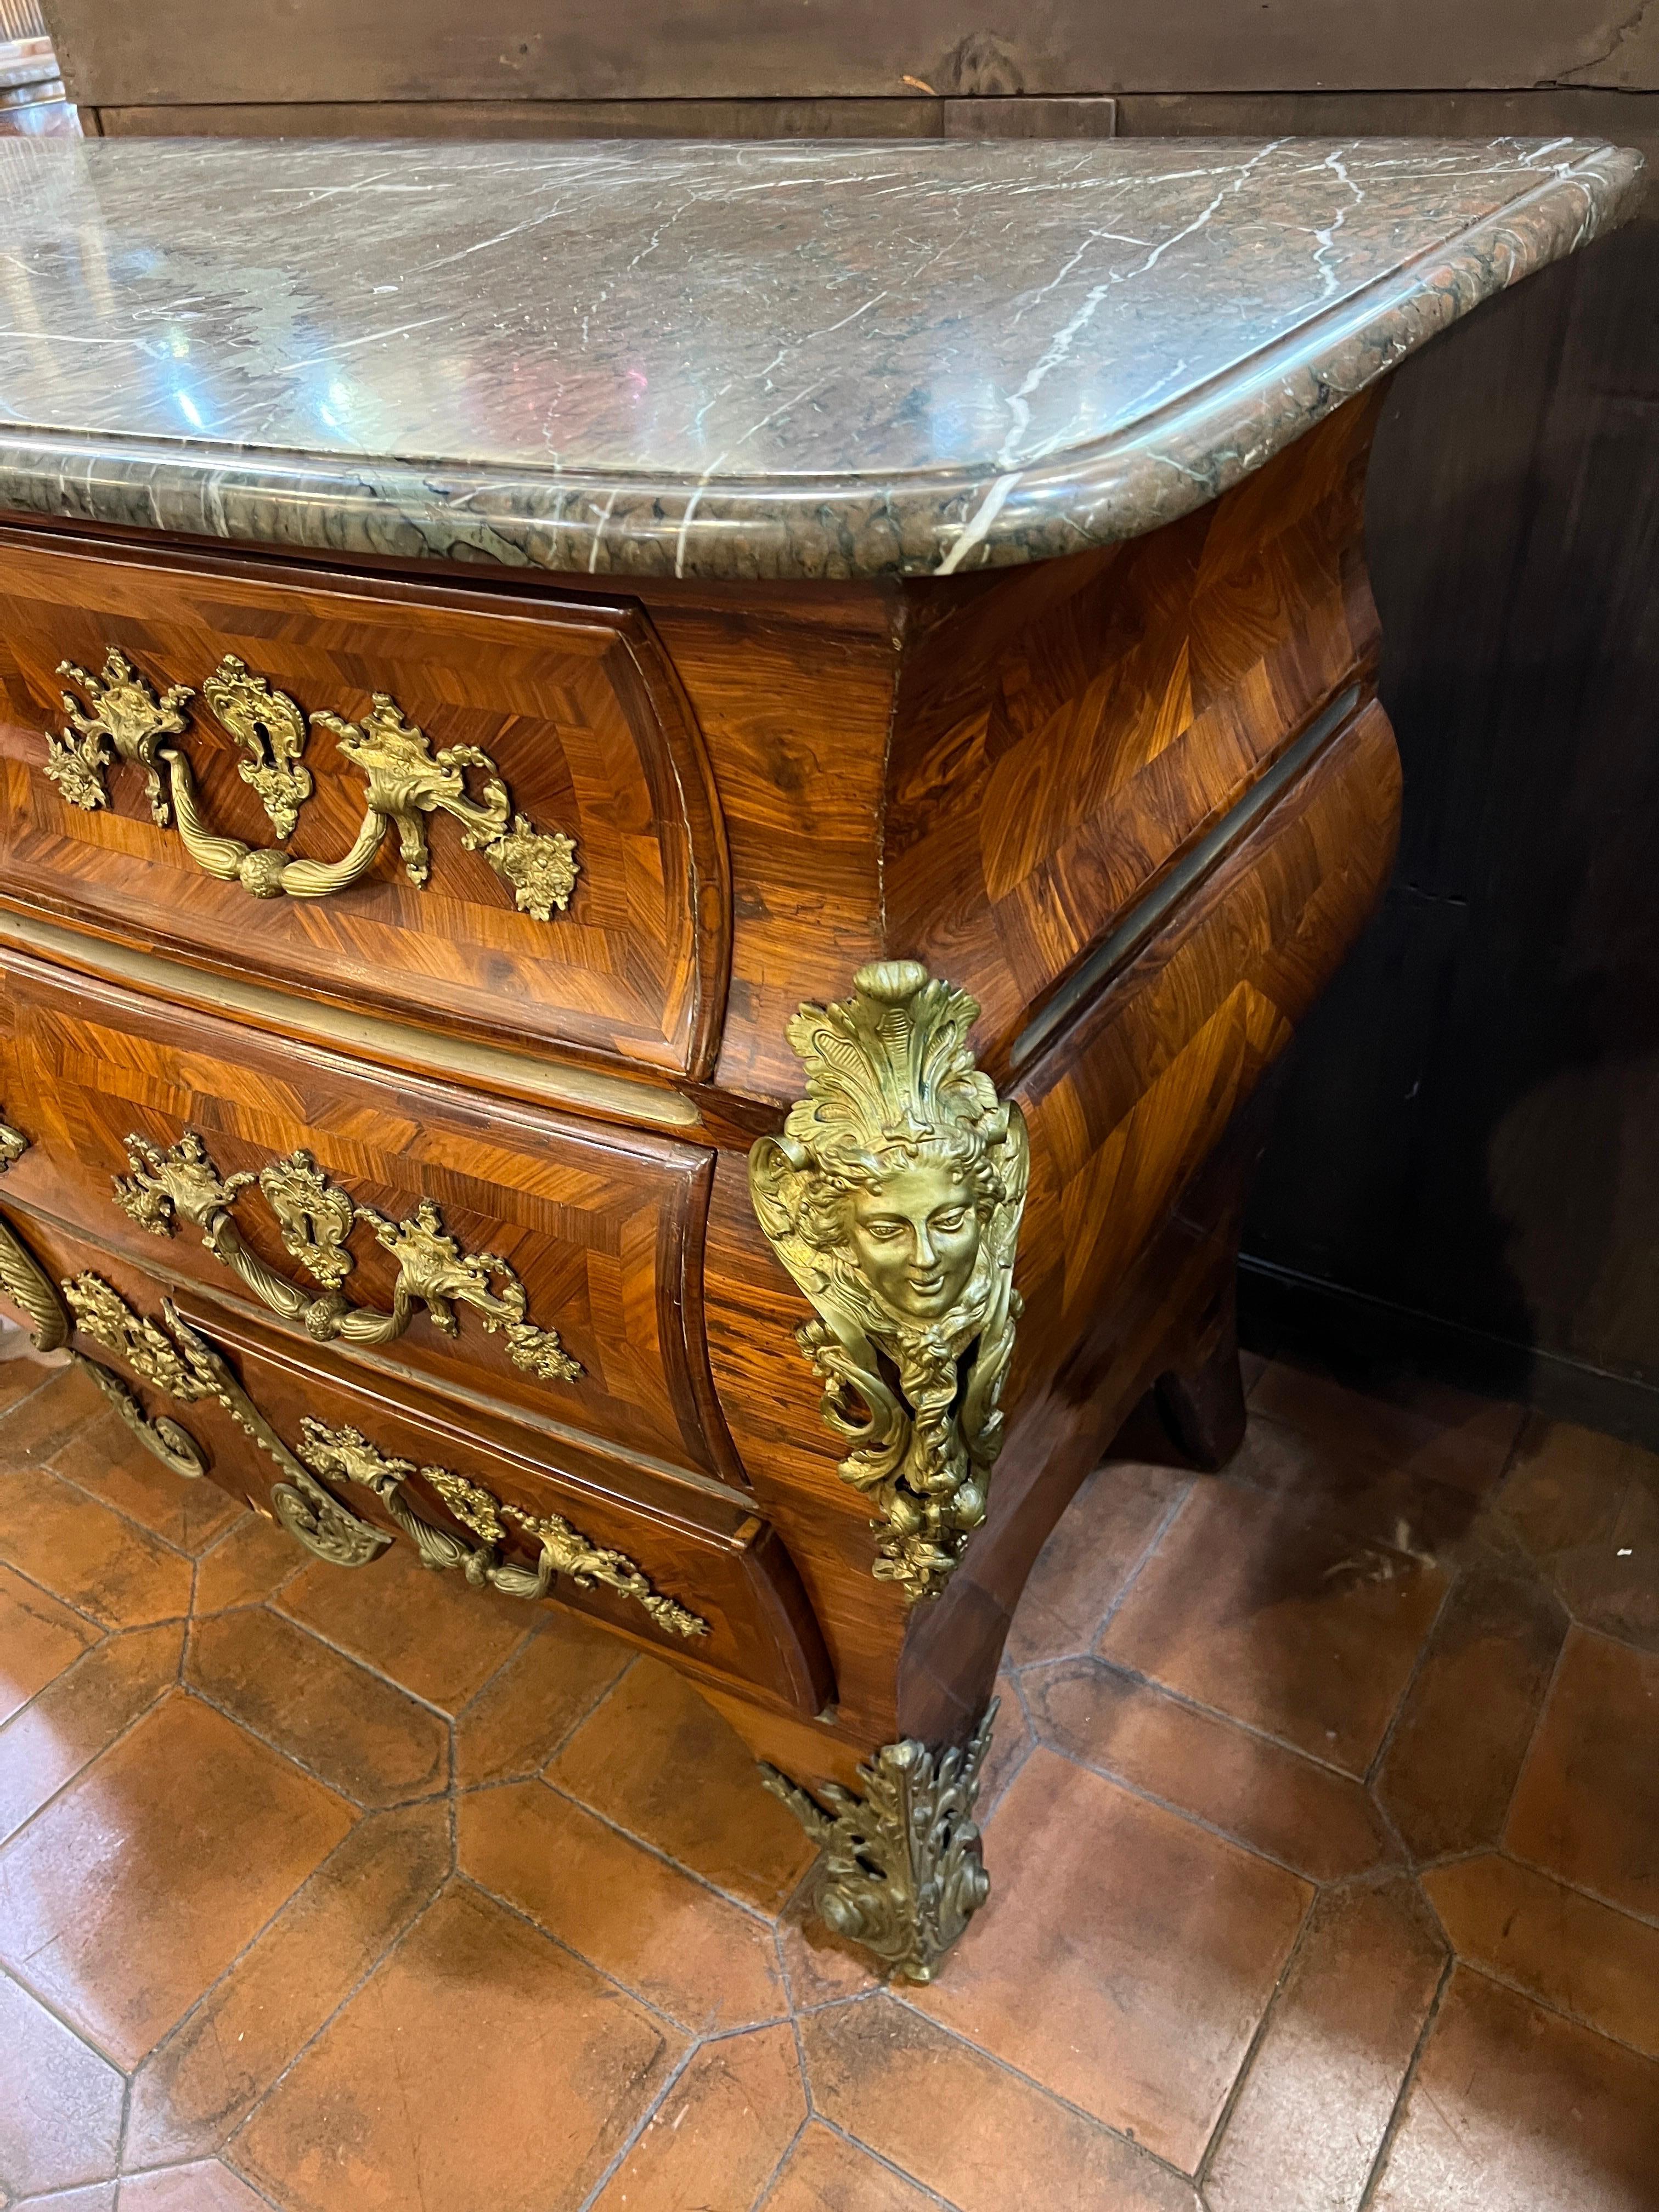 18th Century Important Wooden Commode of King Louis XV  by Pierre Migeon 1740 For Sale 5